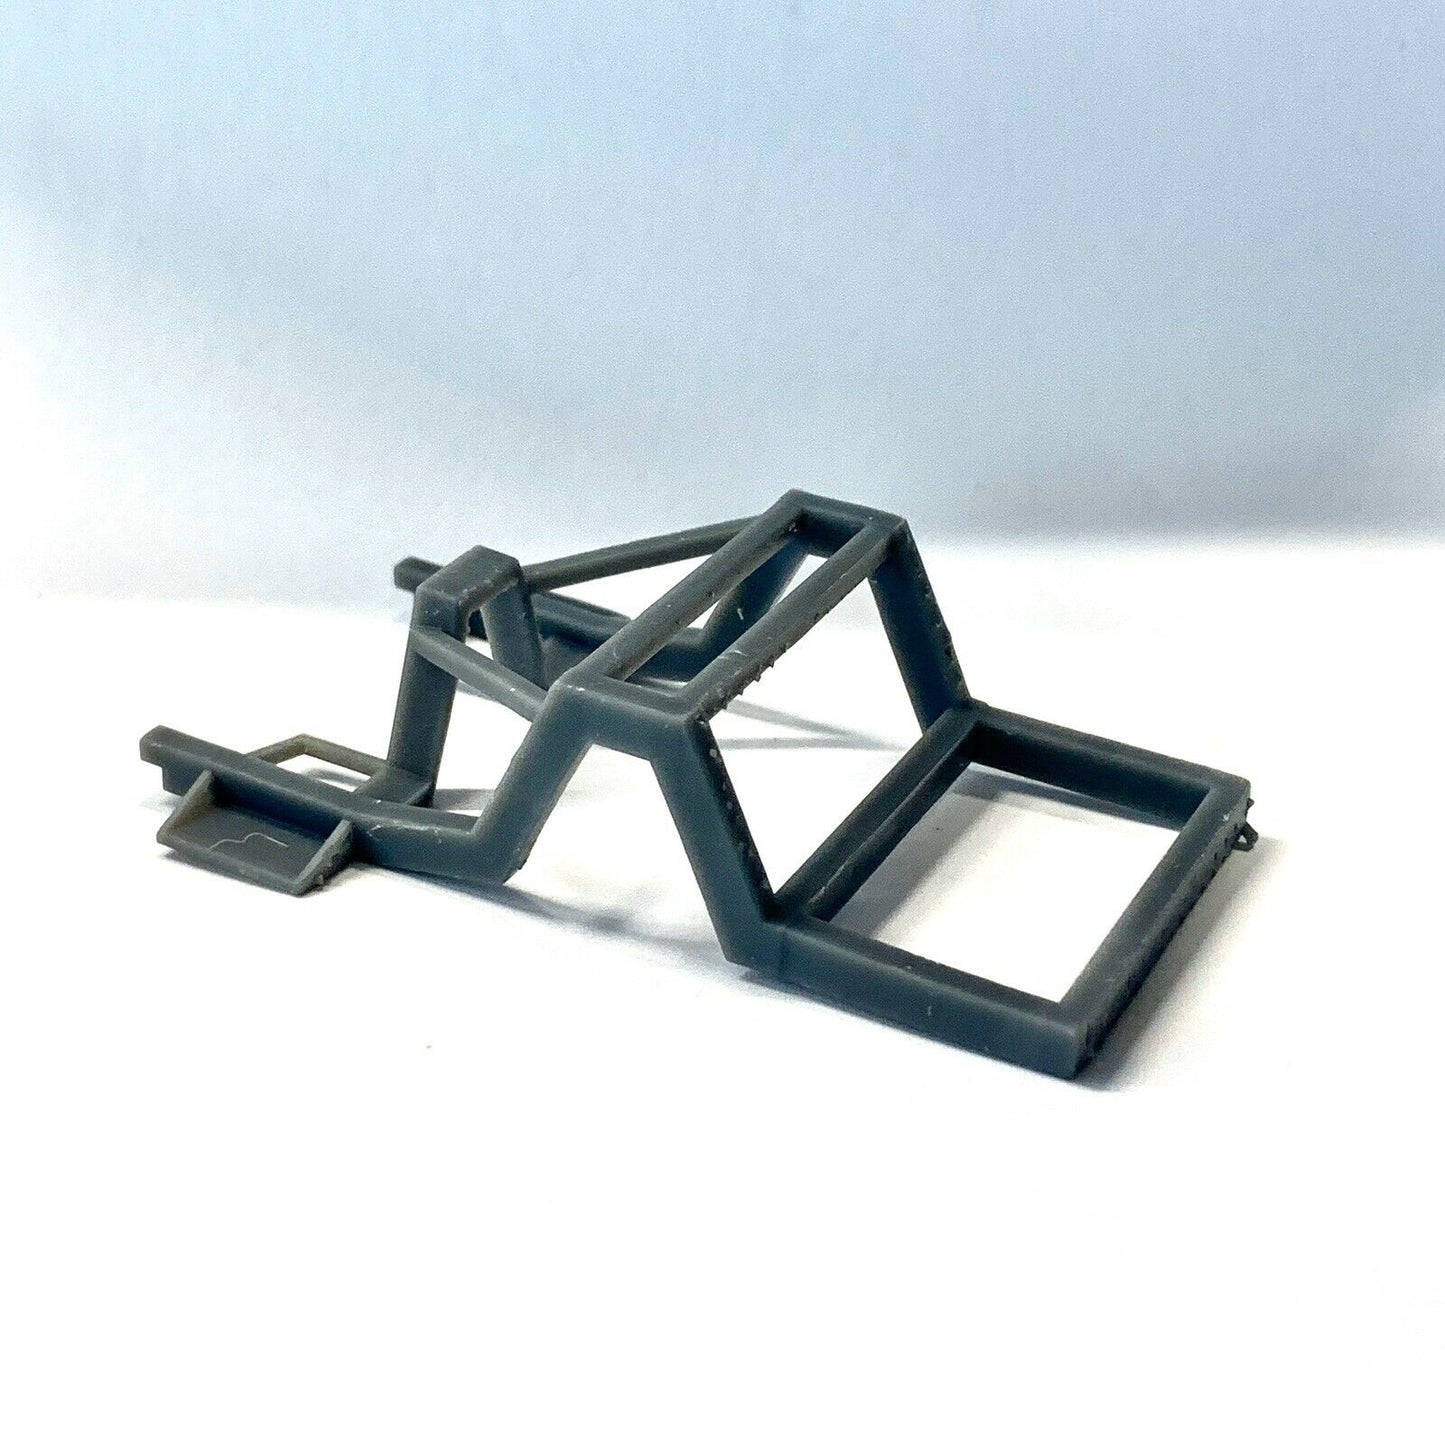 Universal Rear Frame/Chassis for Lowered, Dropped, or Slammed Pro Street Trucks or Cars 1/24 1/25